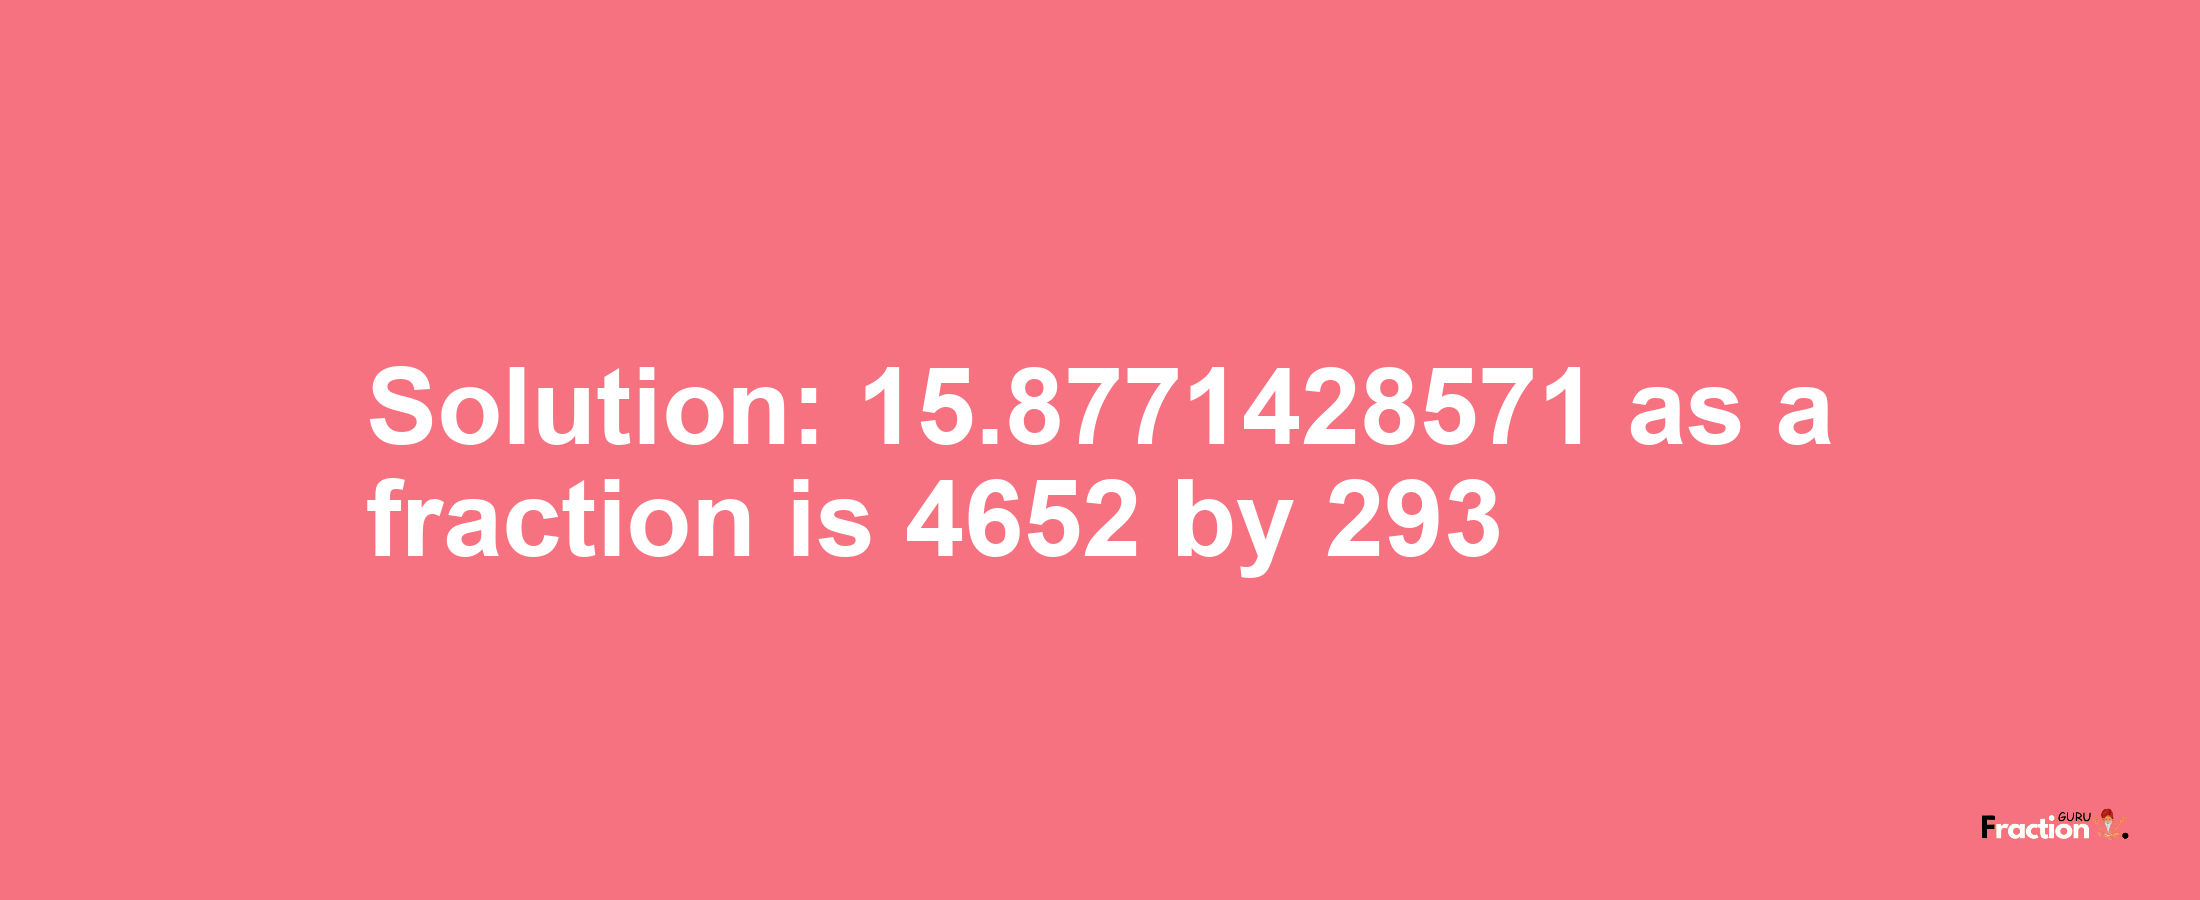 Solution:15.8771428571 as a fraction is 4652/293